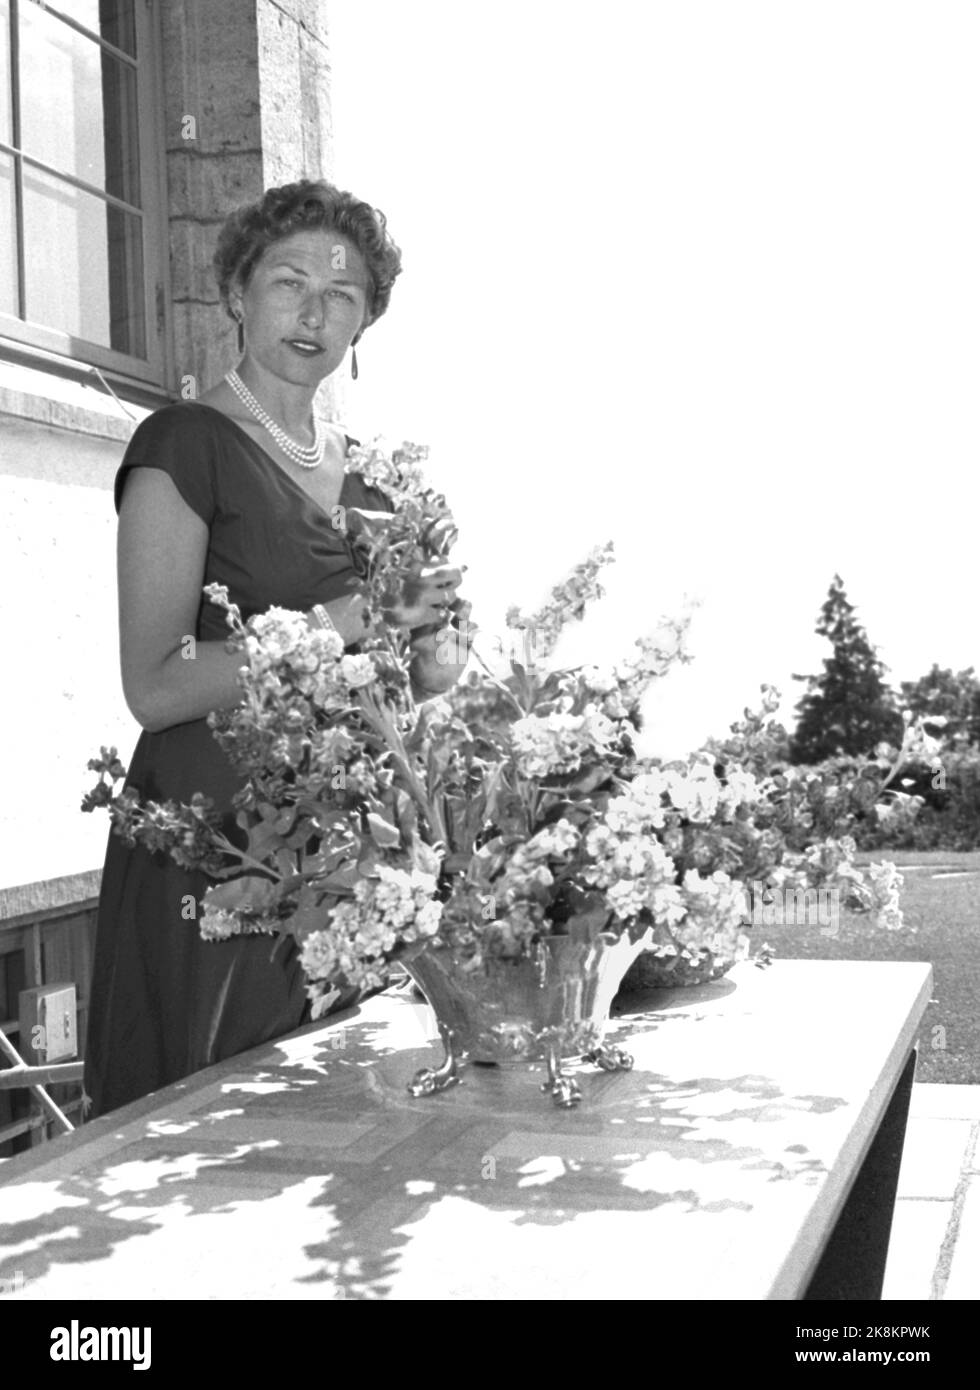 Skaugum 19560707. Princess Astrid the country's first lady at Skaugum. The princess has taken over a good part of the royal house's official representation duties after her mother Crown Princess Märtha died. Her big hobbies are gardening and ceramic work. Here, Princess Astrid decorates with flowers. Pearl chain. Photo: Sverre A. Børretsen / Aage Storløkken / Current / NTB Stock Photo